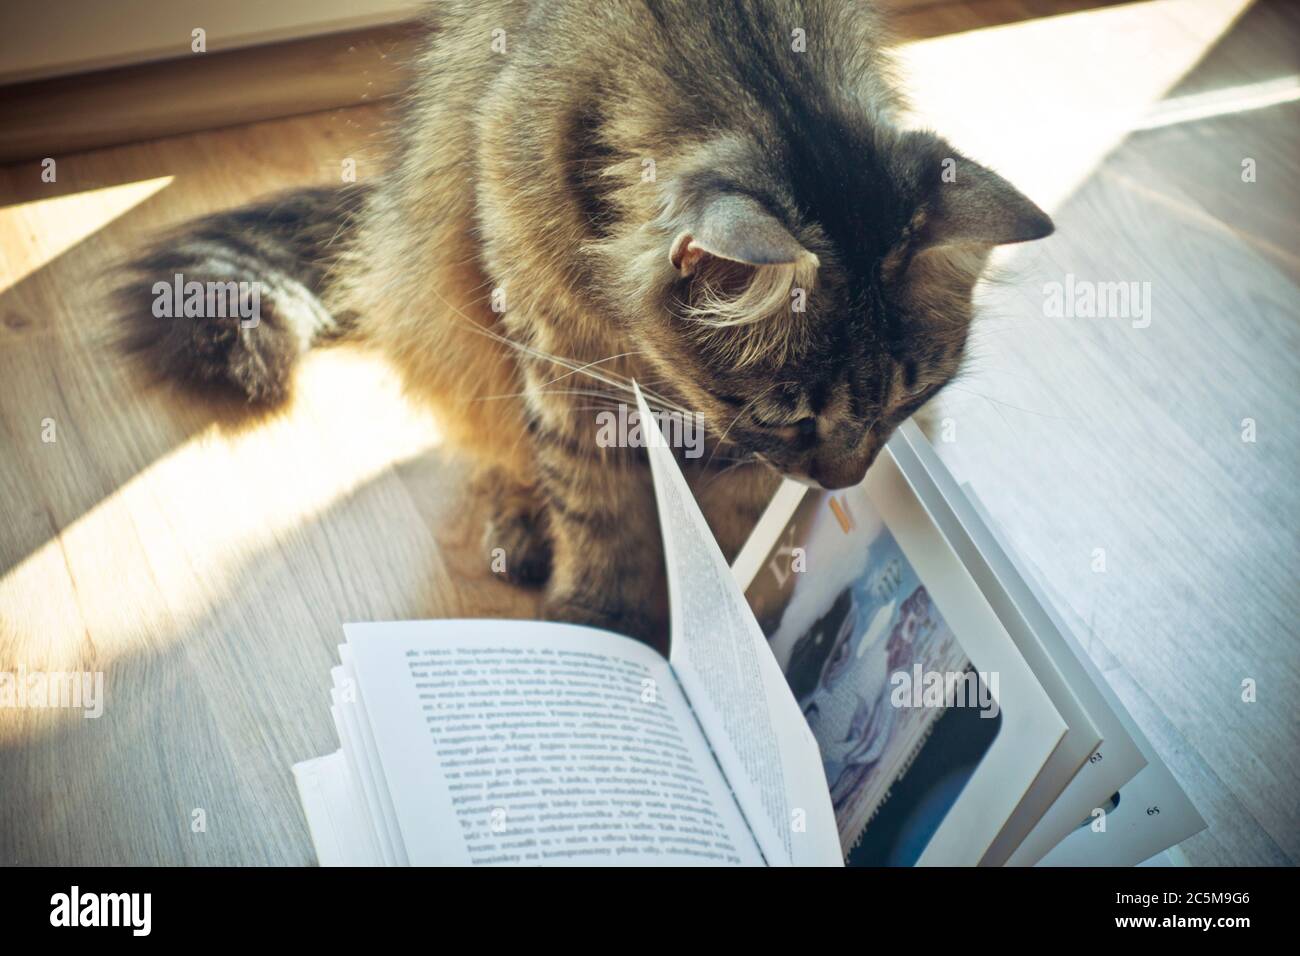 cat reading a book Stock Photo